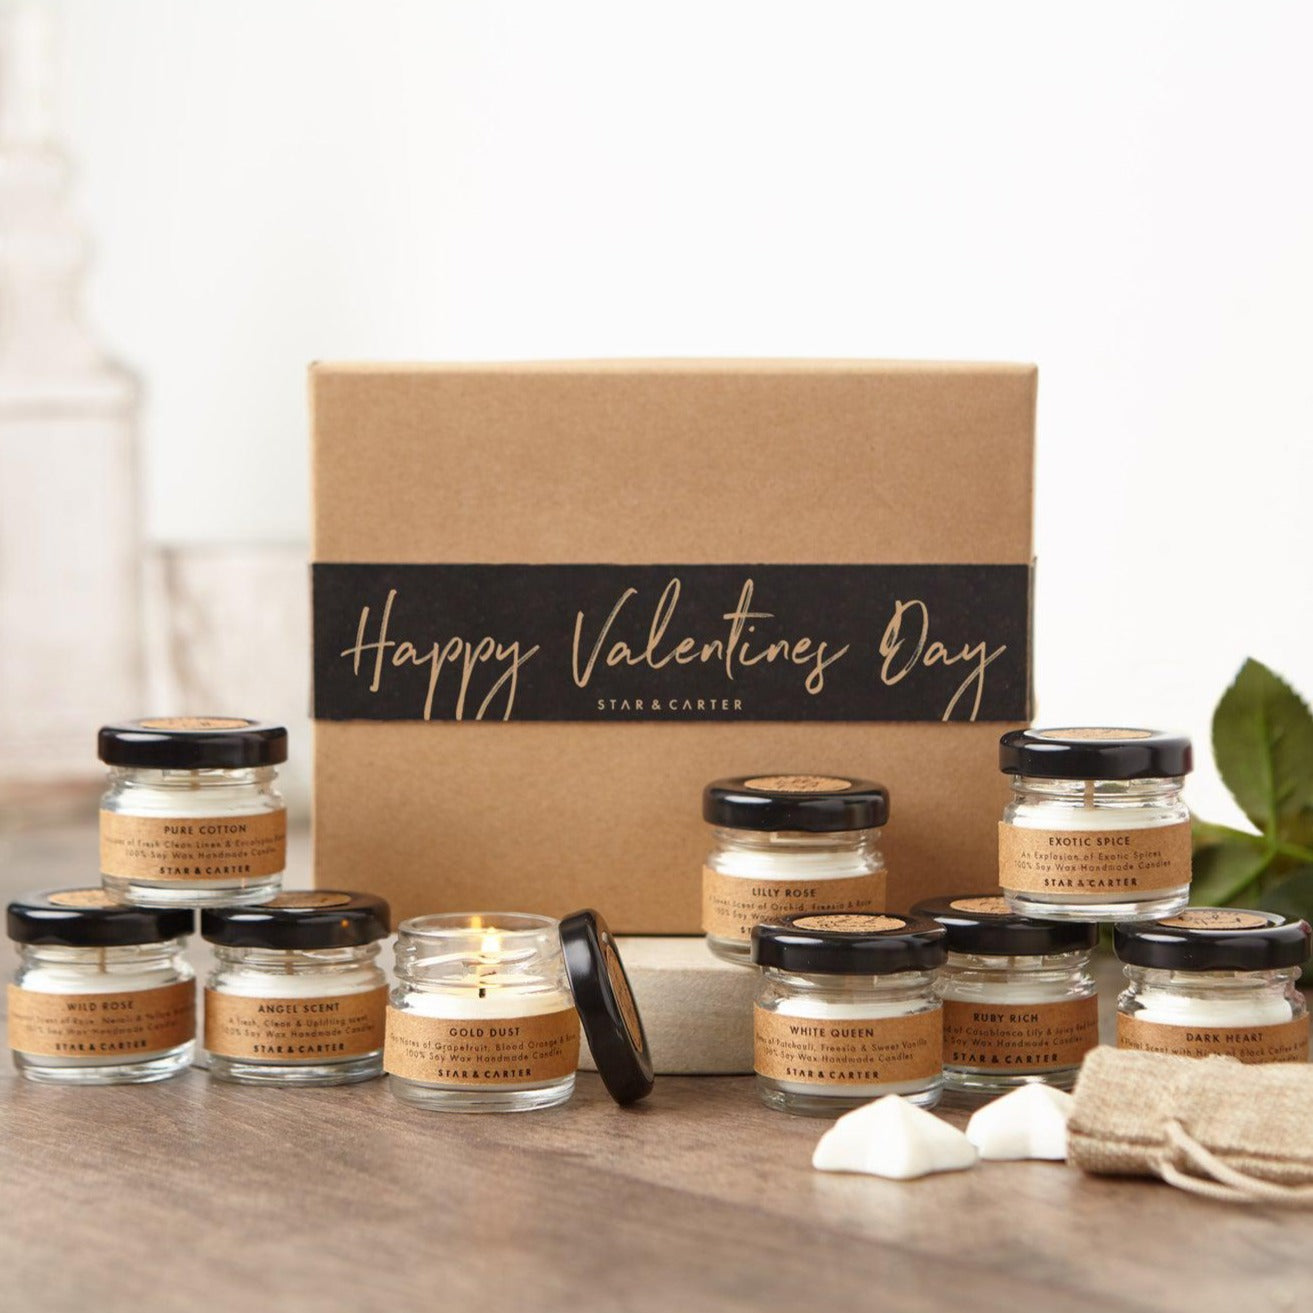 Happy Valentines day candle gift set